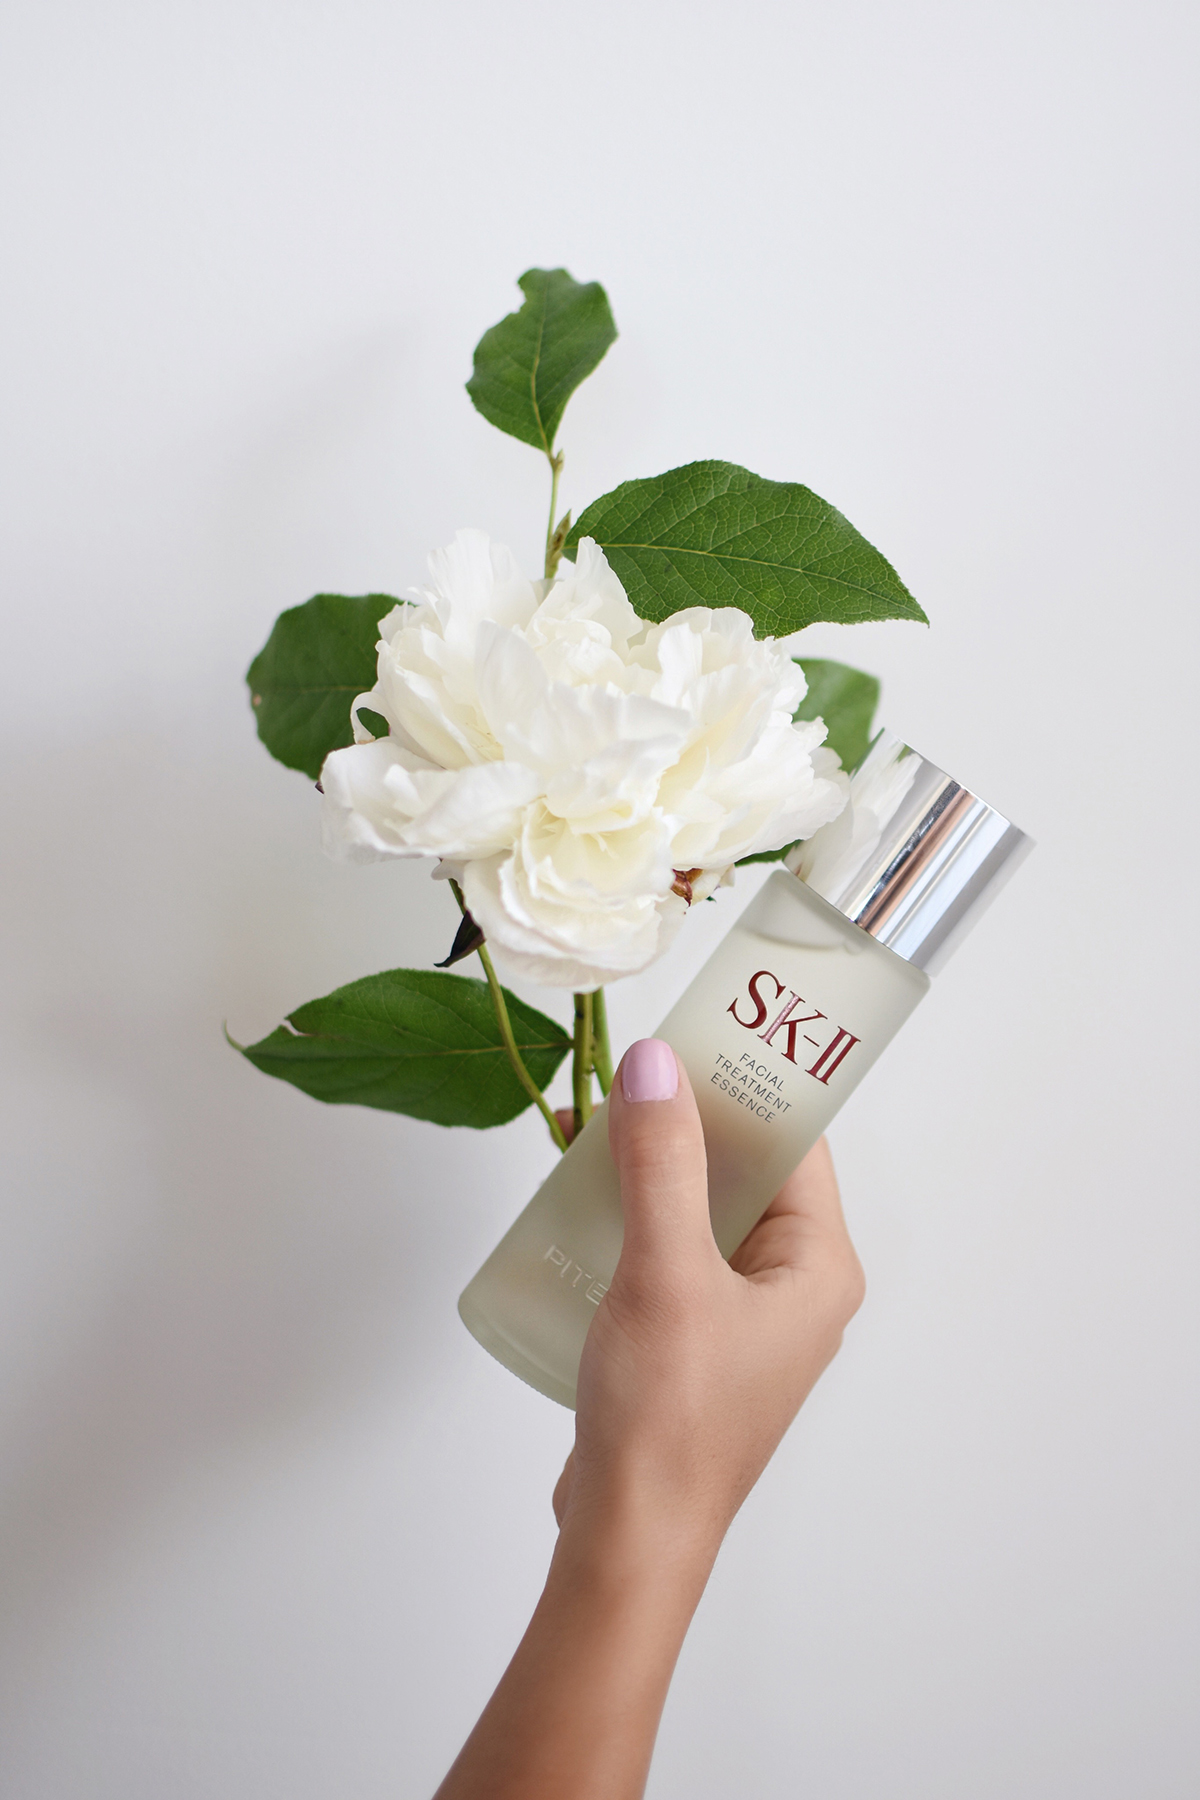 SK-II Facial Treatment Essence - TIPS FOR GLOWING SKIN WITH SK-II by popular Denver beauty blogger Chic Talk